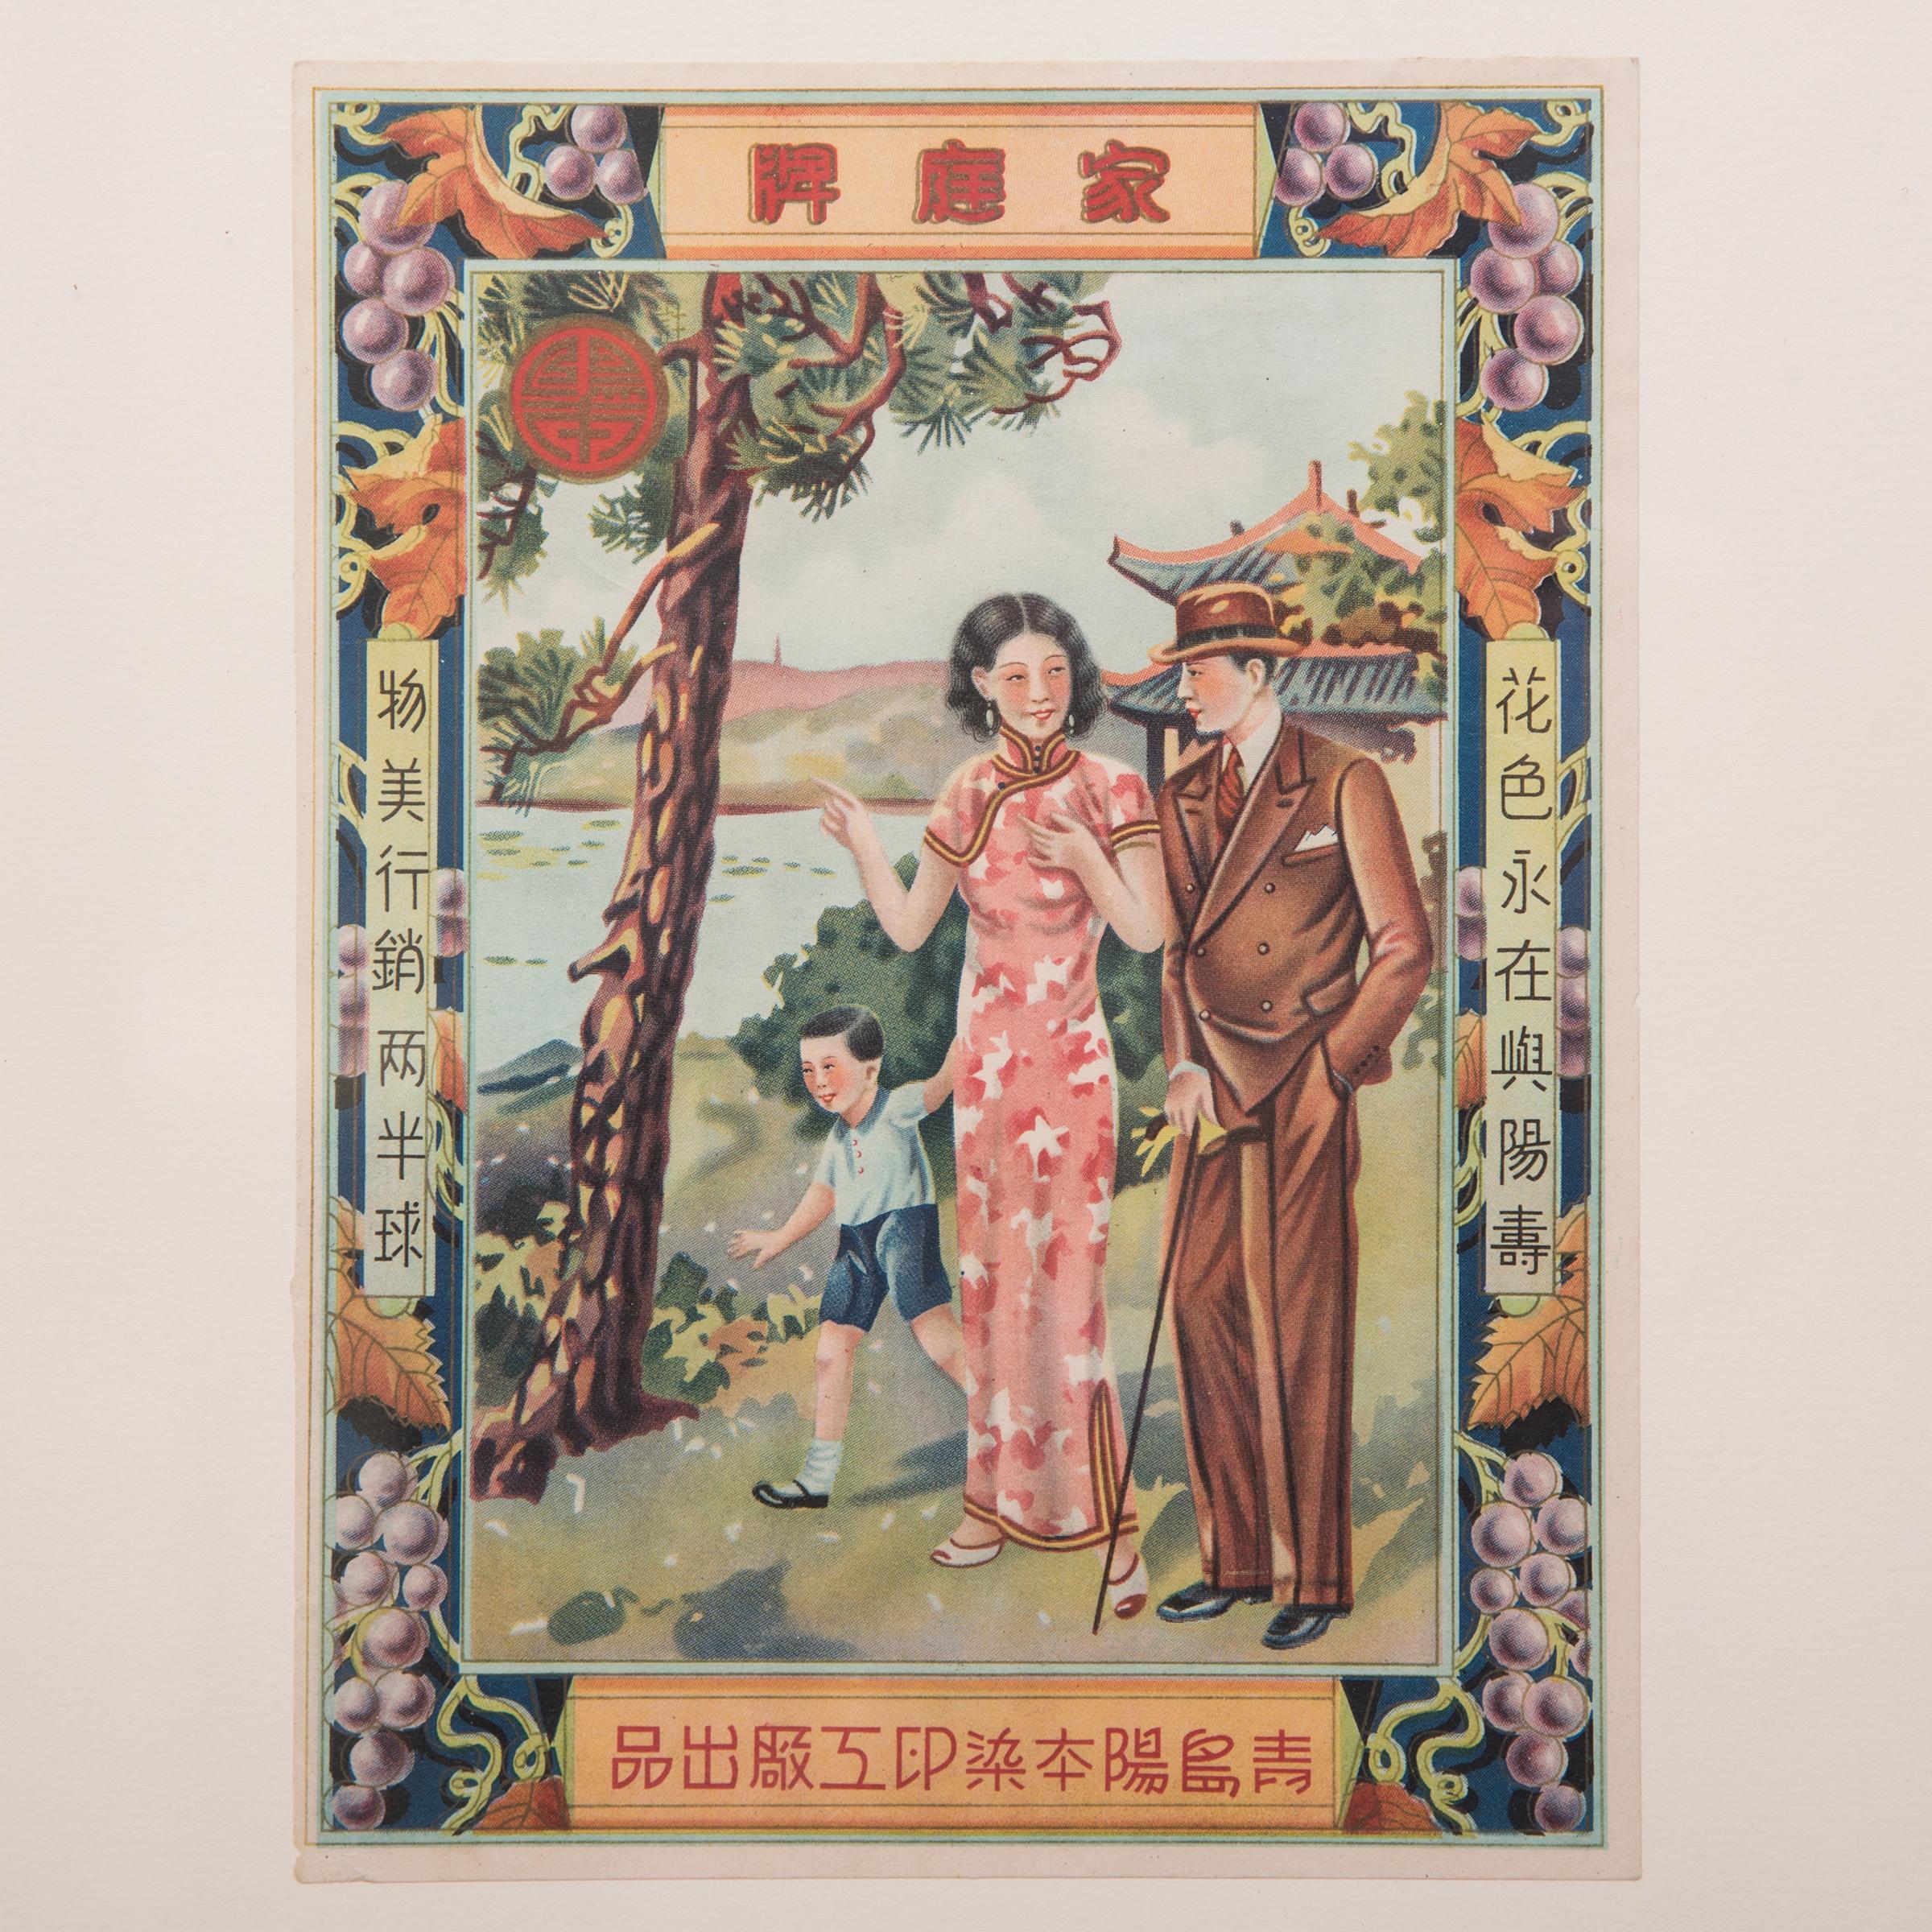 Vintage Chinese Republic Period Advertisement - Art Deco Print by Unknown